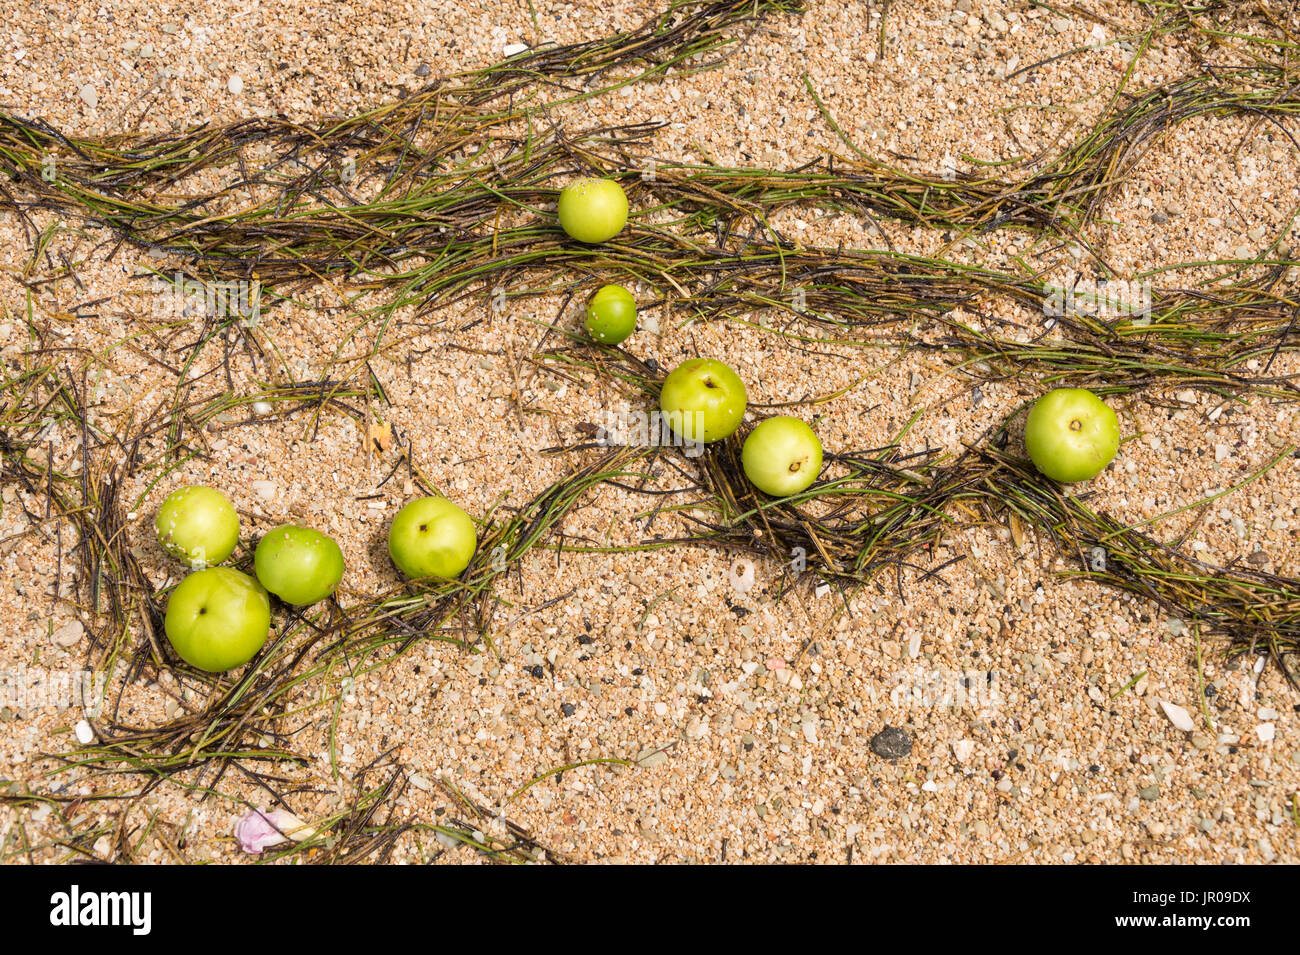 Manchineel apples on sand. Manchineel Tree (Hippomane mancinella) is one of the most dangerous and toxic trees in the world. Martinique / West Indies Stock Photo